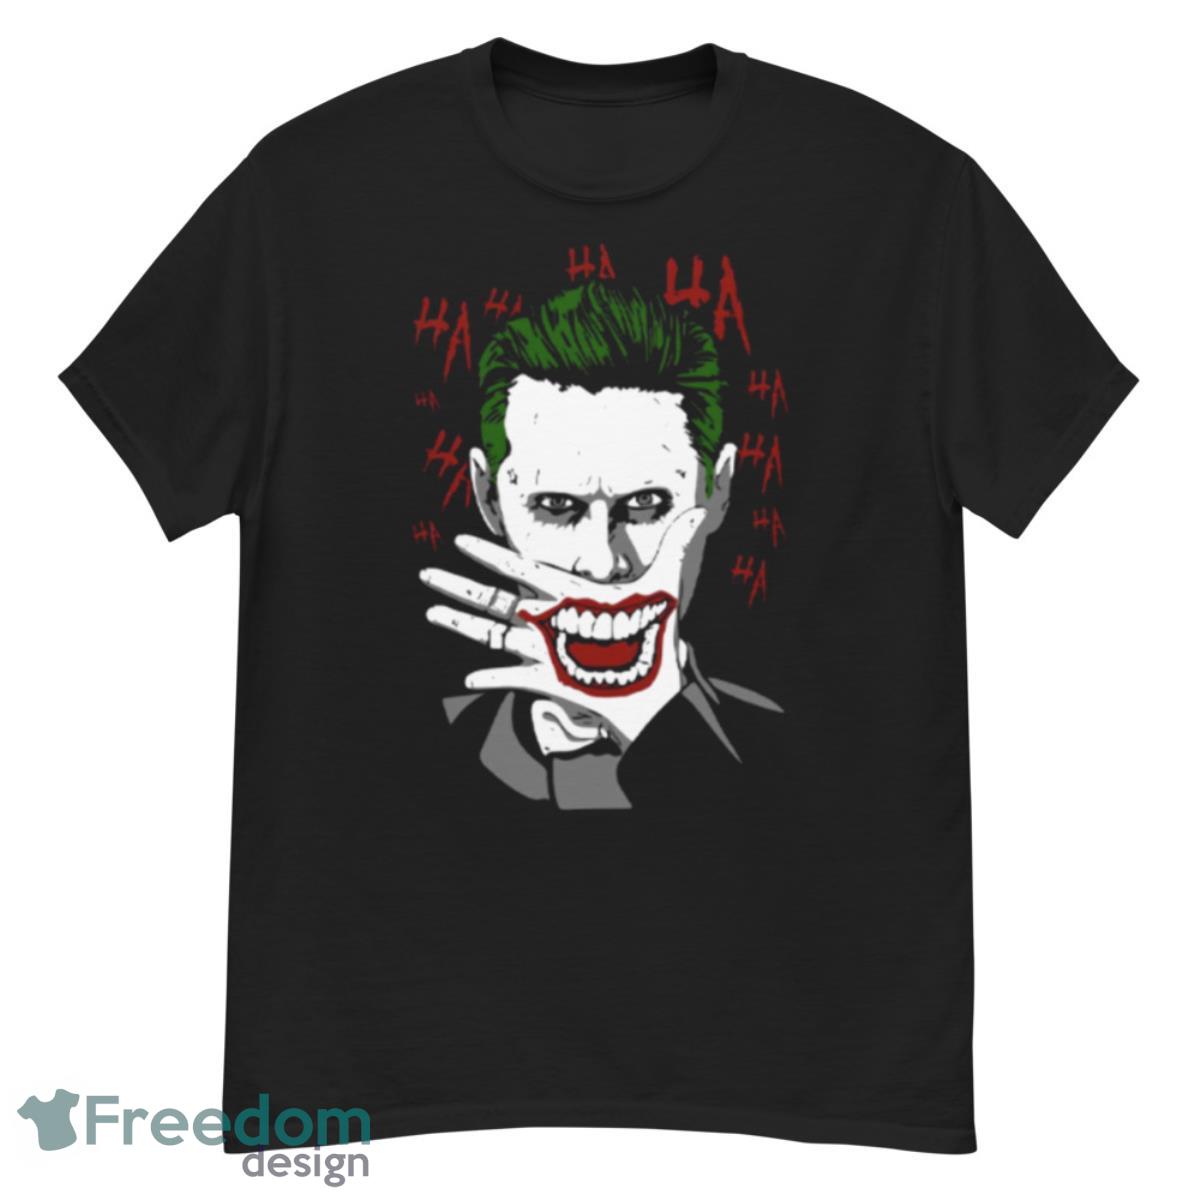 Iconic Moment Of Joker Laughing Suicide Squad shirt - G500 Men’s Classic T-Shirt